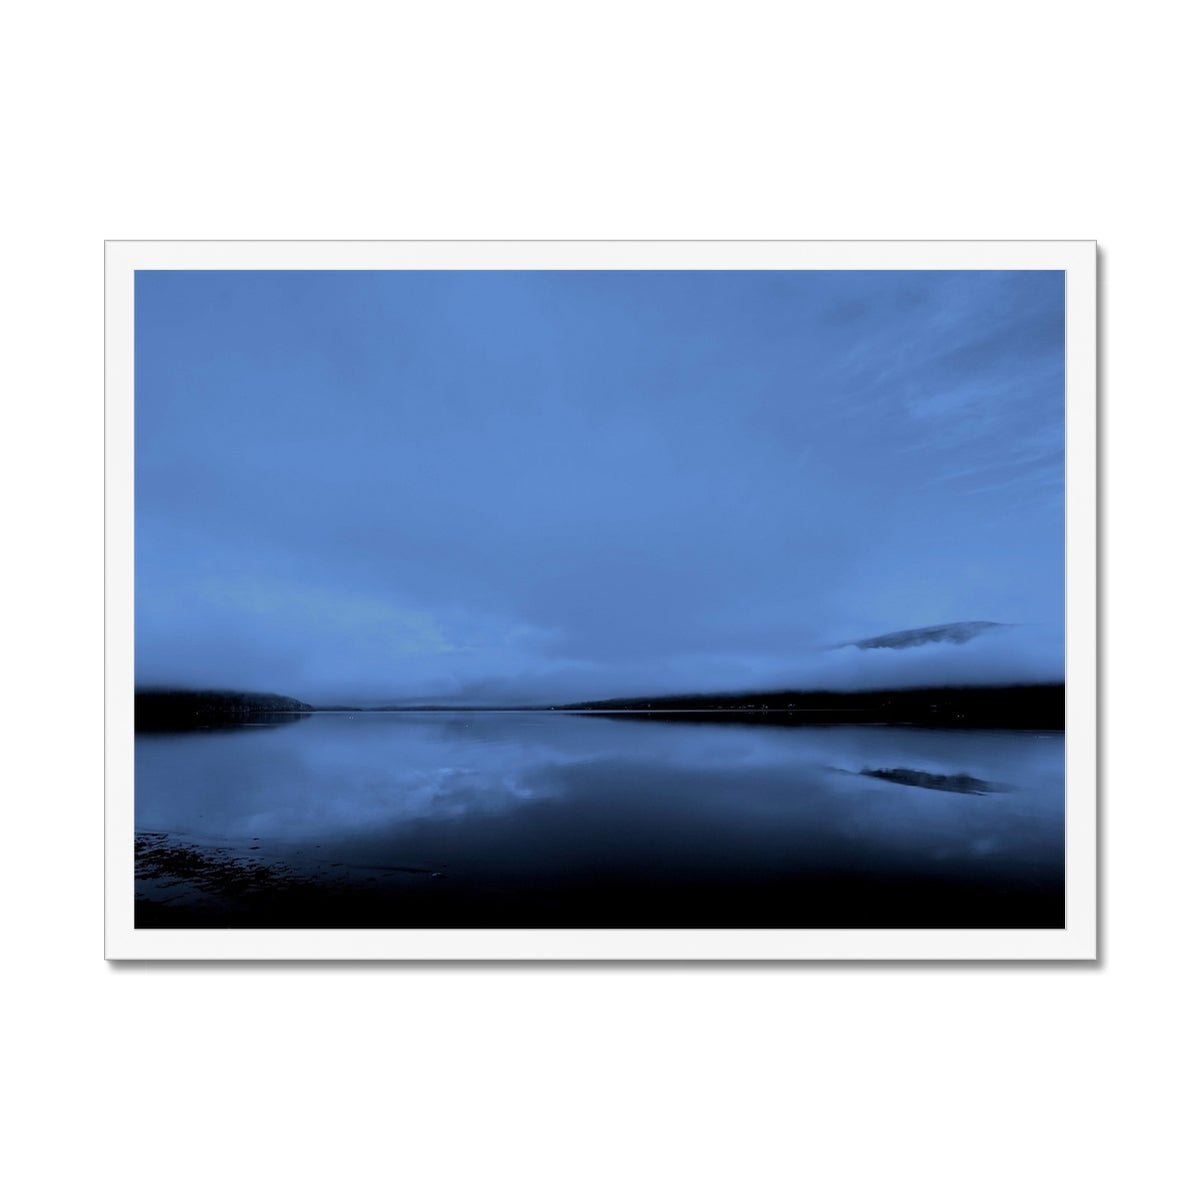 The Blue Hour Loch Fyne Painting | Framed Prints From Scotland-Framed Prints-Scottish Lochs & Mountains Art Gallery-A2 Landscape-White Frame-Paintings, Prints, Homeware, Art Gifts From Scotland By Scottish Artist Kevin Hunter